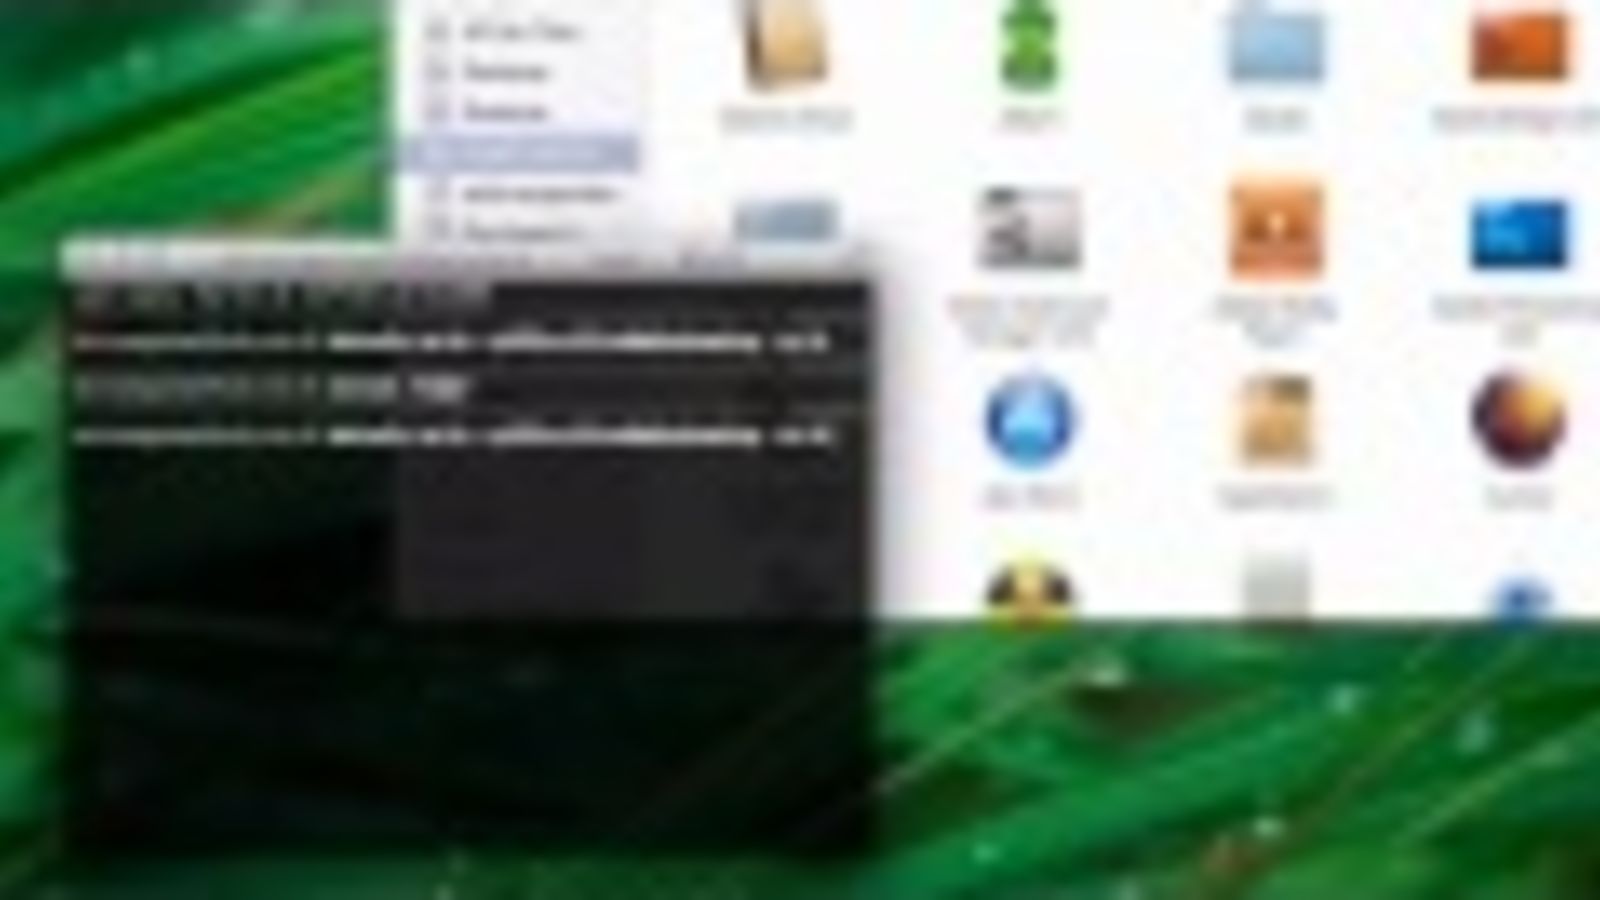 Terminal Commands For Macbook Running Os X Lion 10.7.2